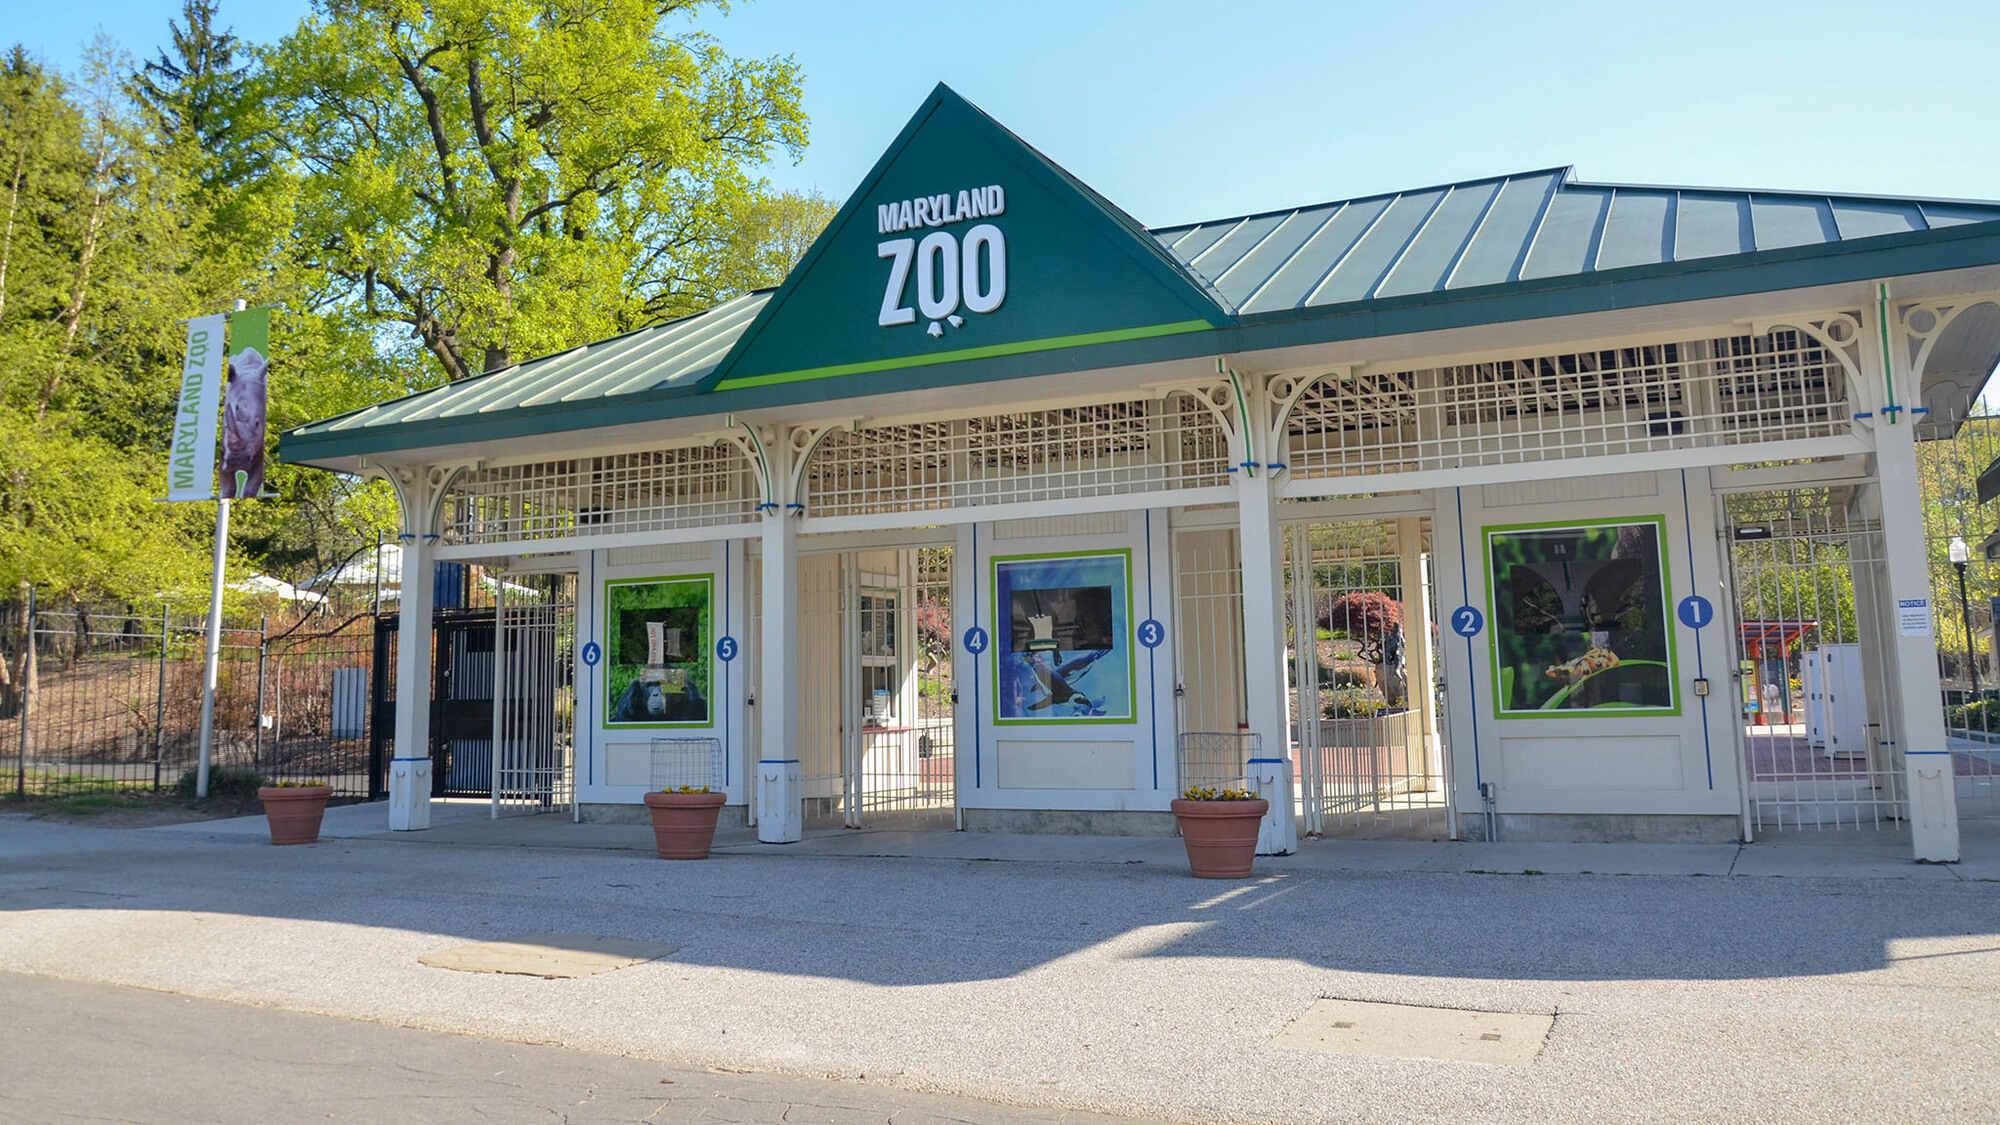 10-astounding-facts-about-baltimores-maryland-zoo